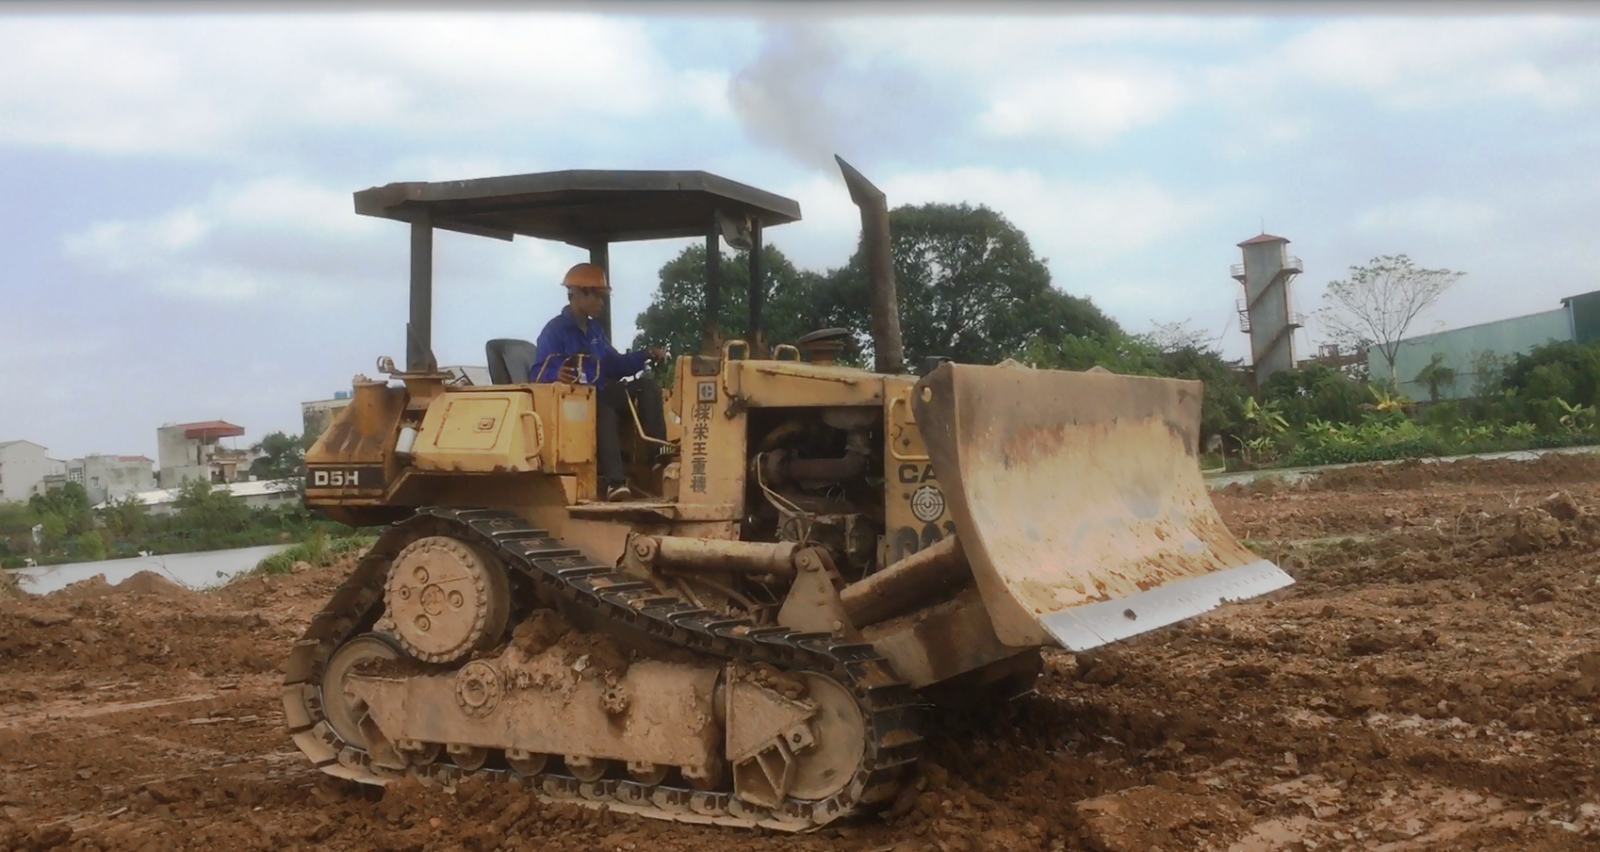 Bulldozer trade test for Vietnam manpower clients- Safe Track Contracting Co.